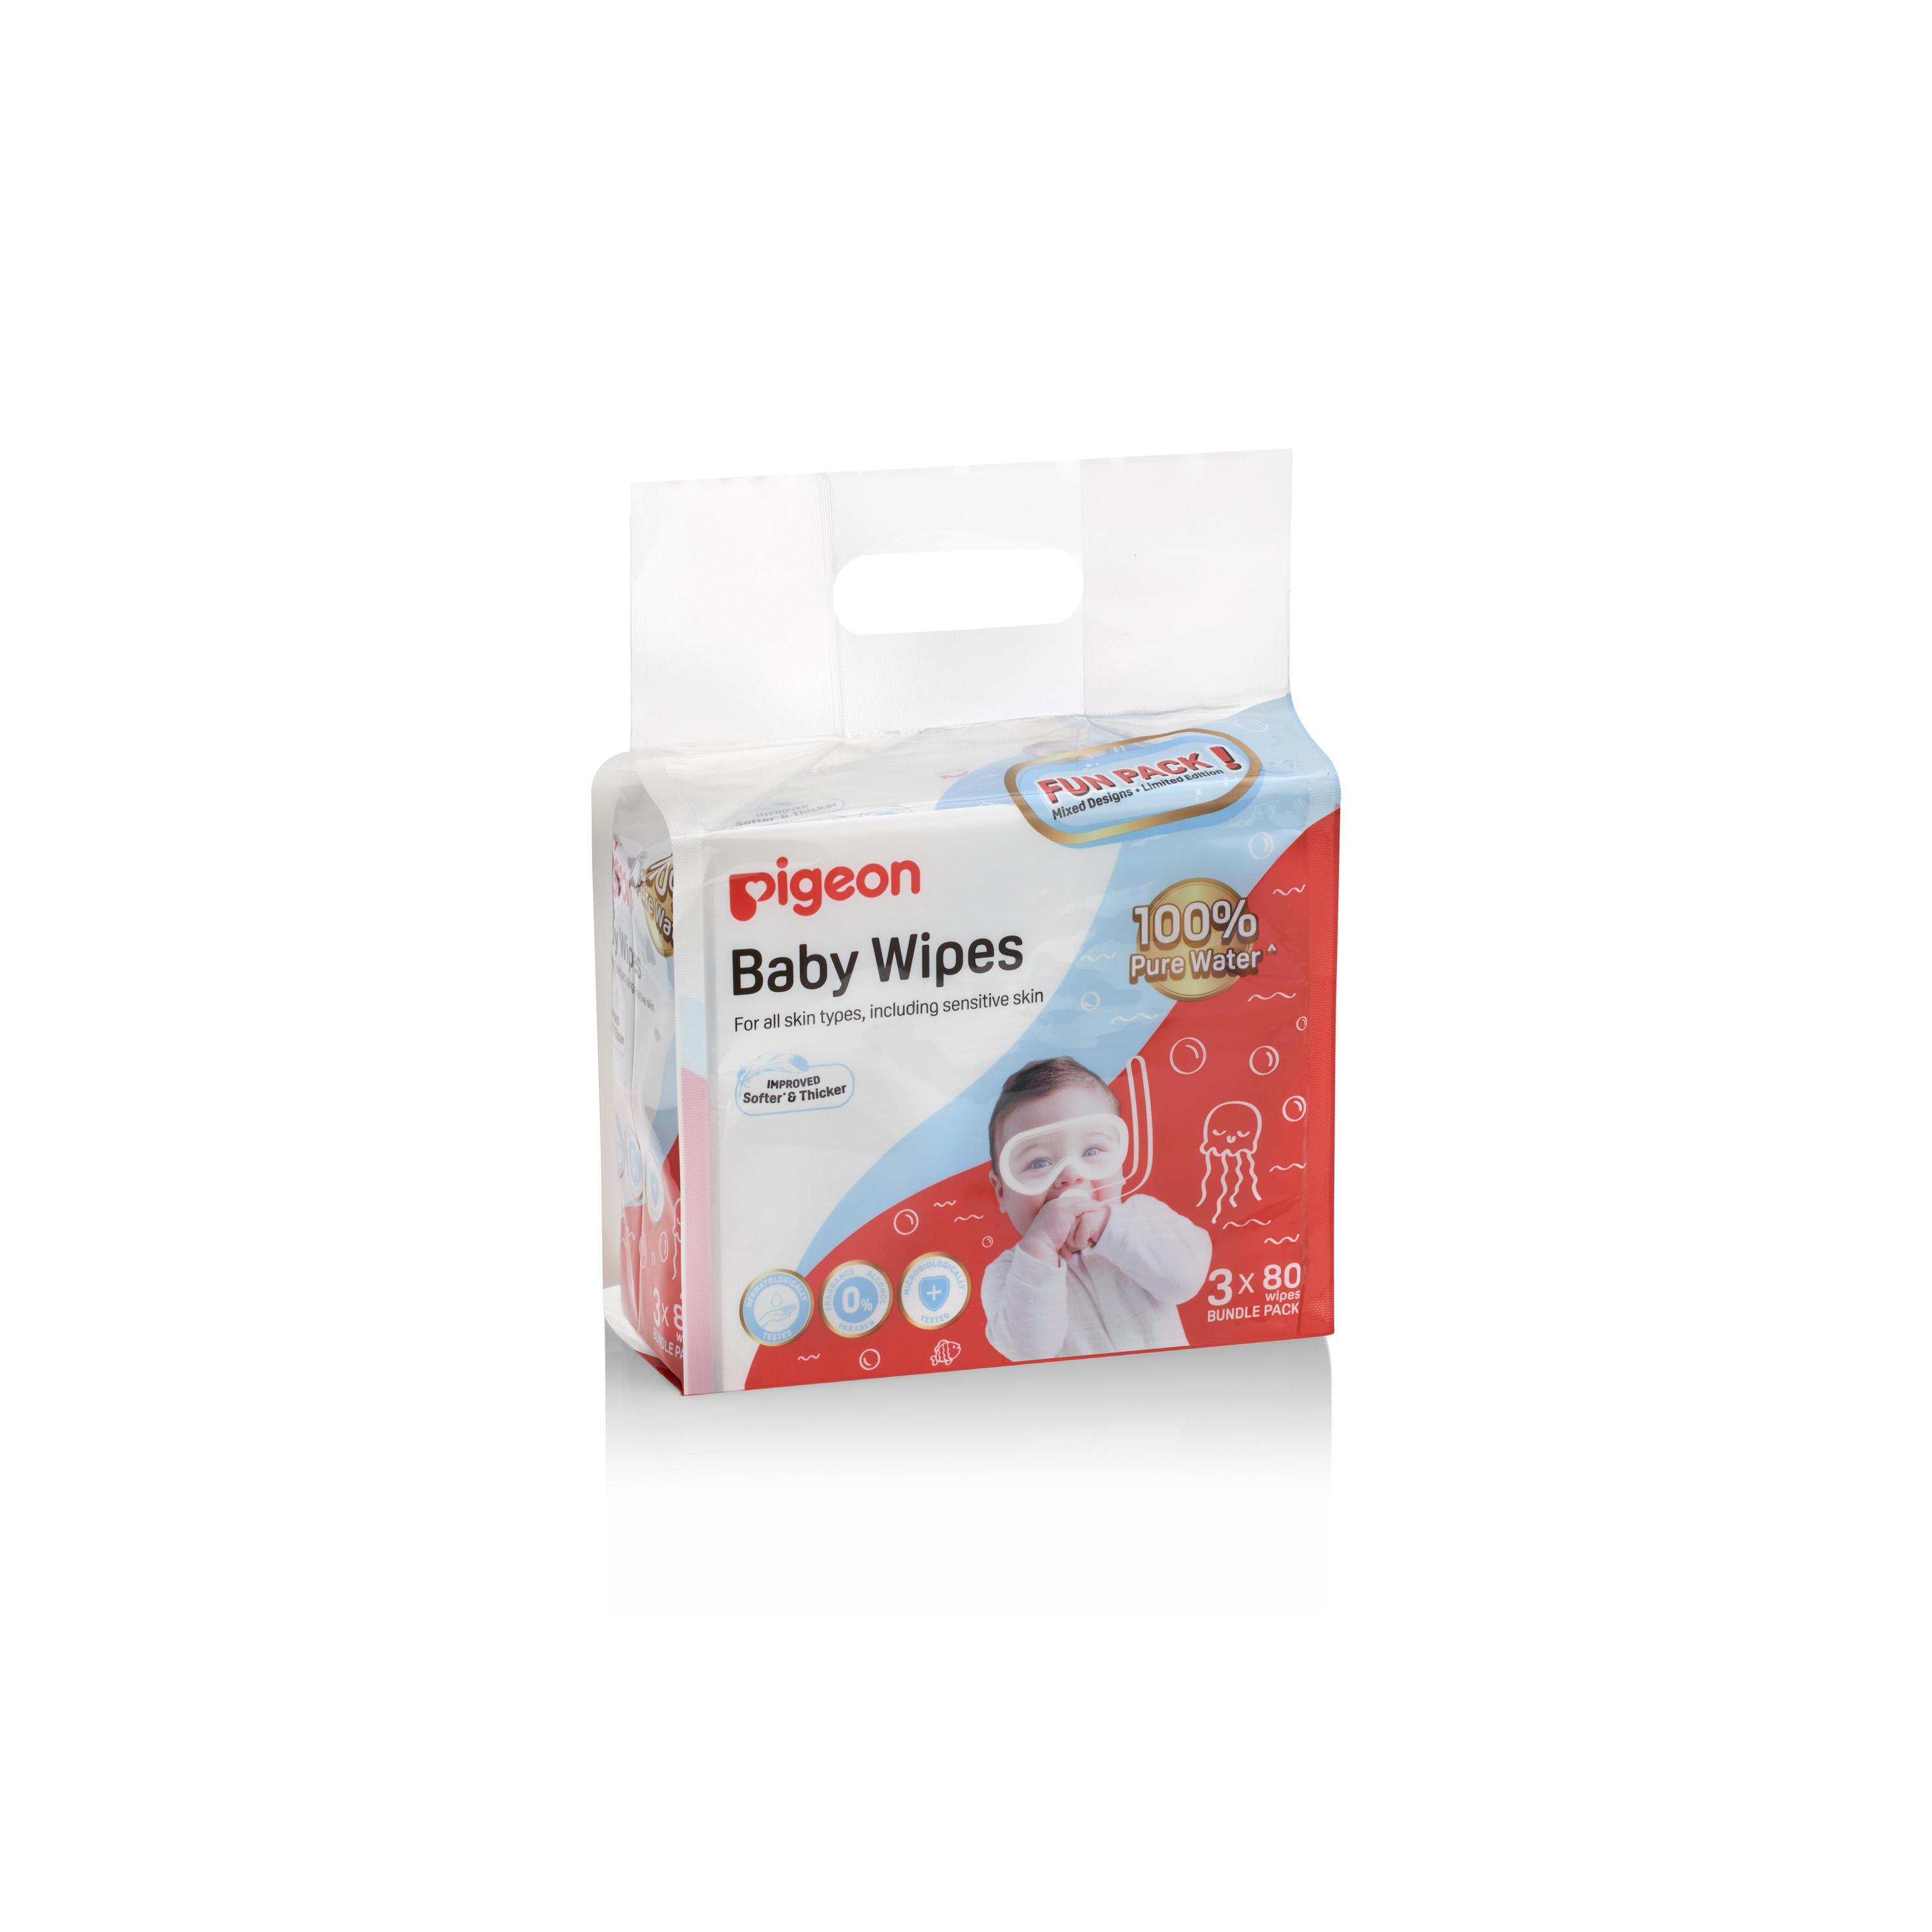 Pigeon Baby Wipes 80 Sheets Water Base 3 In 1 Bag (PG-79495S)